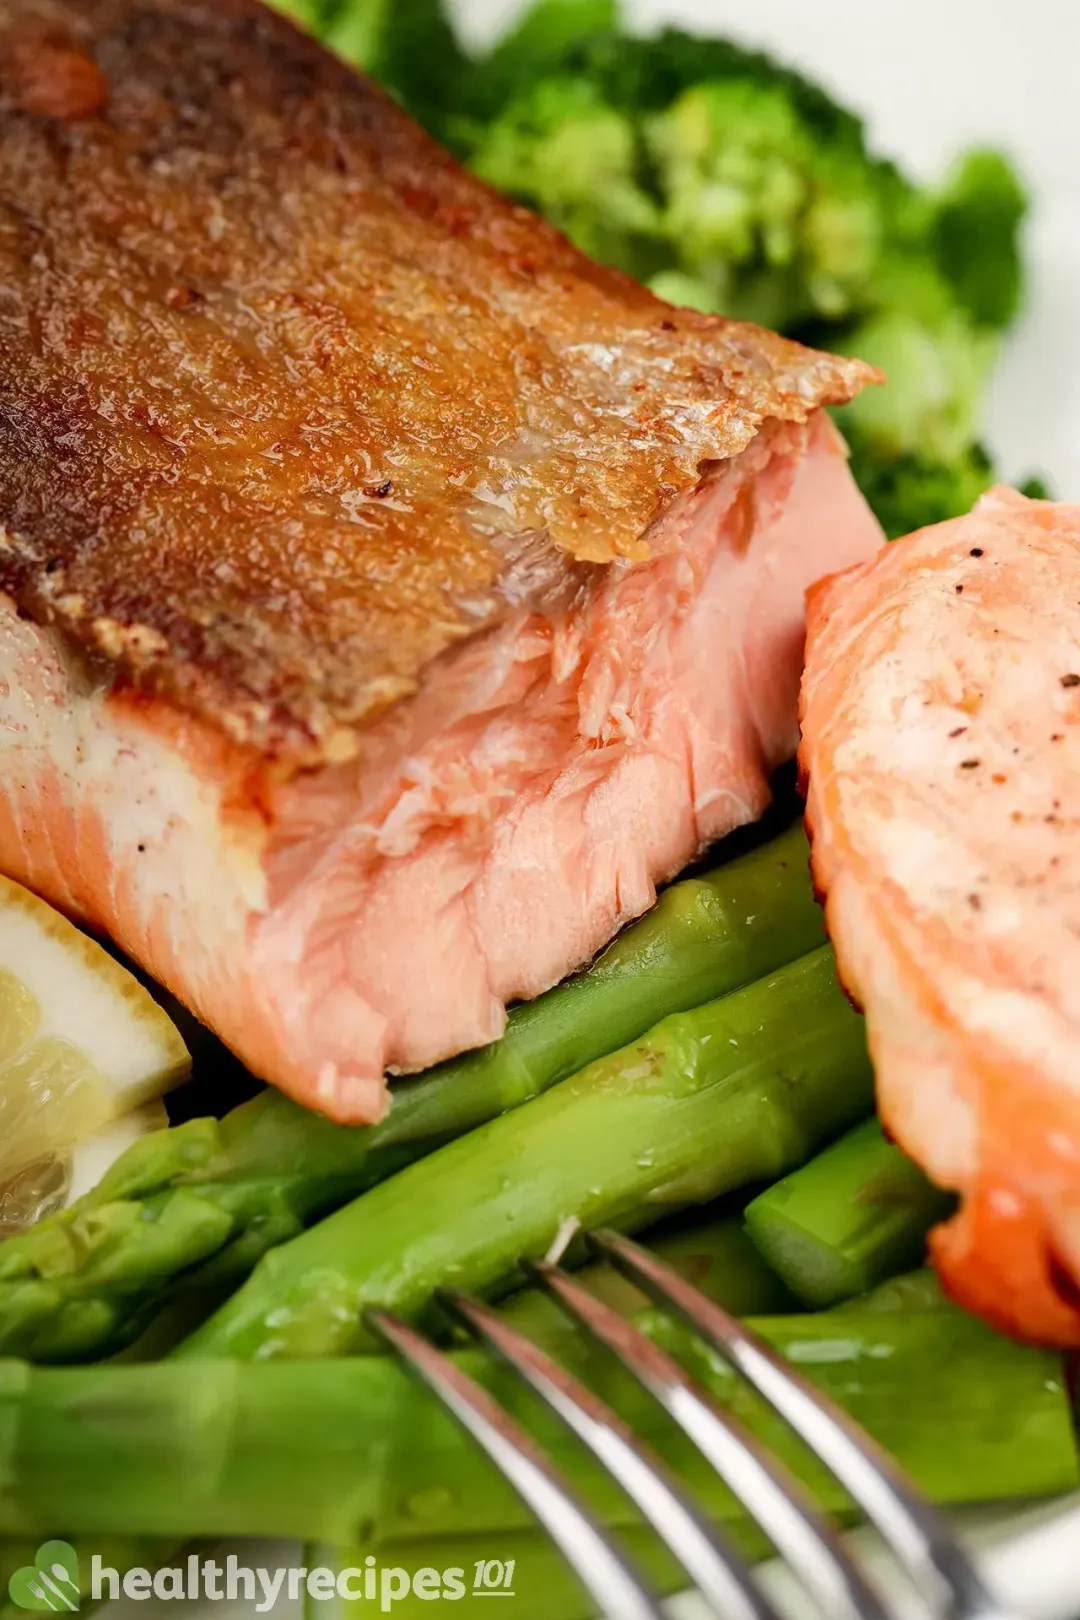 A close-up shot of crispy-skin salmon on a bed of boiled asparagus and broccoli with two slice of lemon on the side